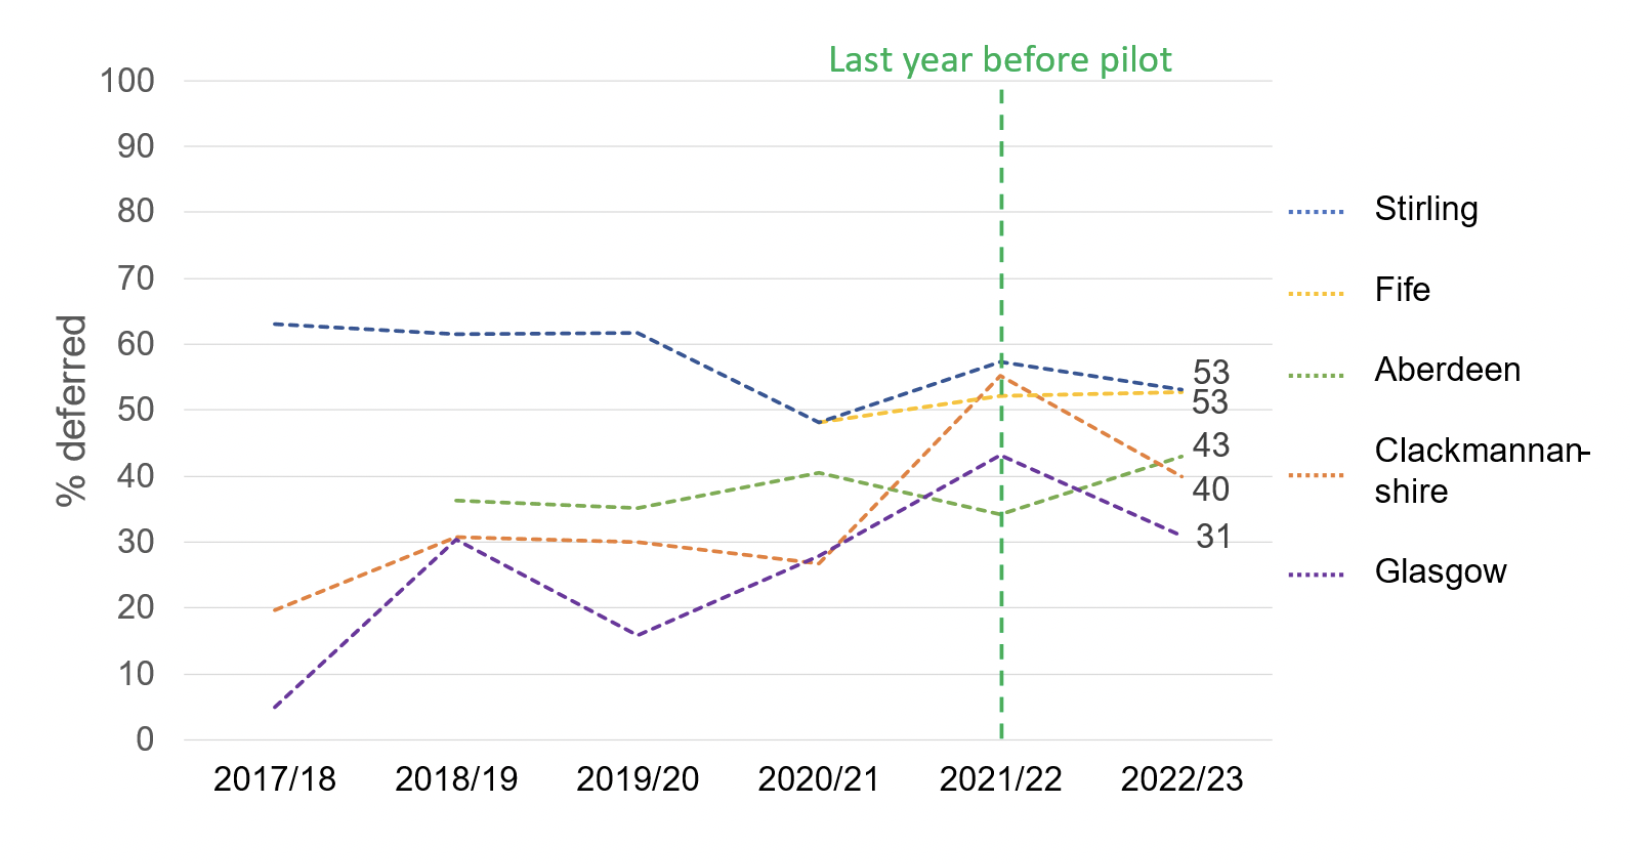 Figure iv is a line chart showing January-February deferral rates for 2017/18 to 2022/23. It compares data from Year 2 pilot areas which are Stirling, Fife, Aberdeen, Clackmannanshire, and Glasgow. There is no a clear overall trend. Some areas like Clackmannanshire and Glasgow saw a small decrease in the year following the pilot implementation in 2021/2022 while others experience no change.